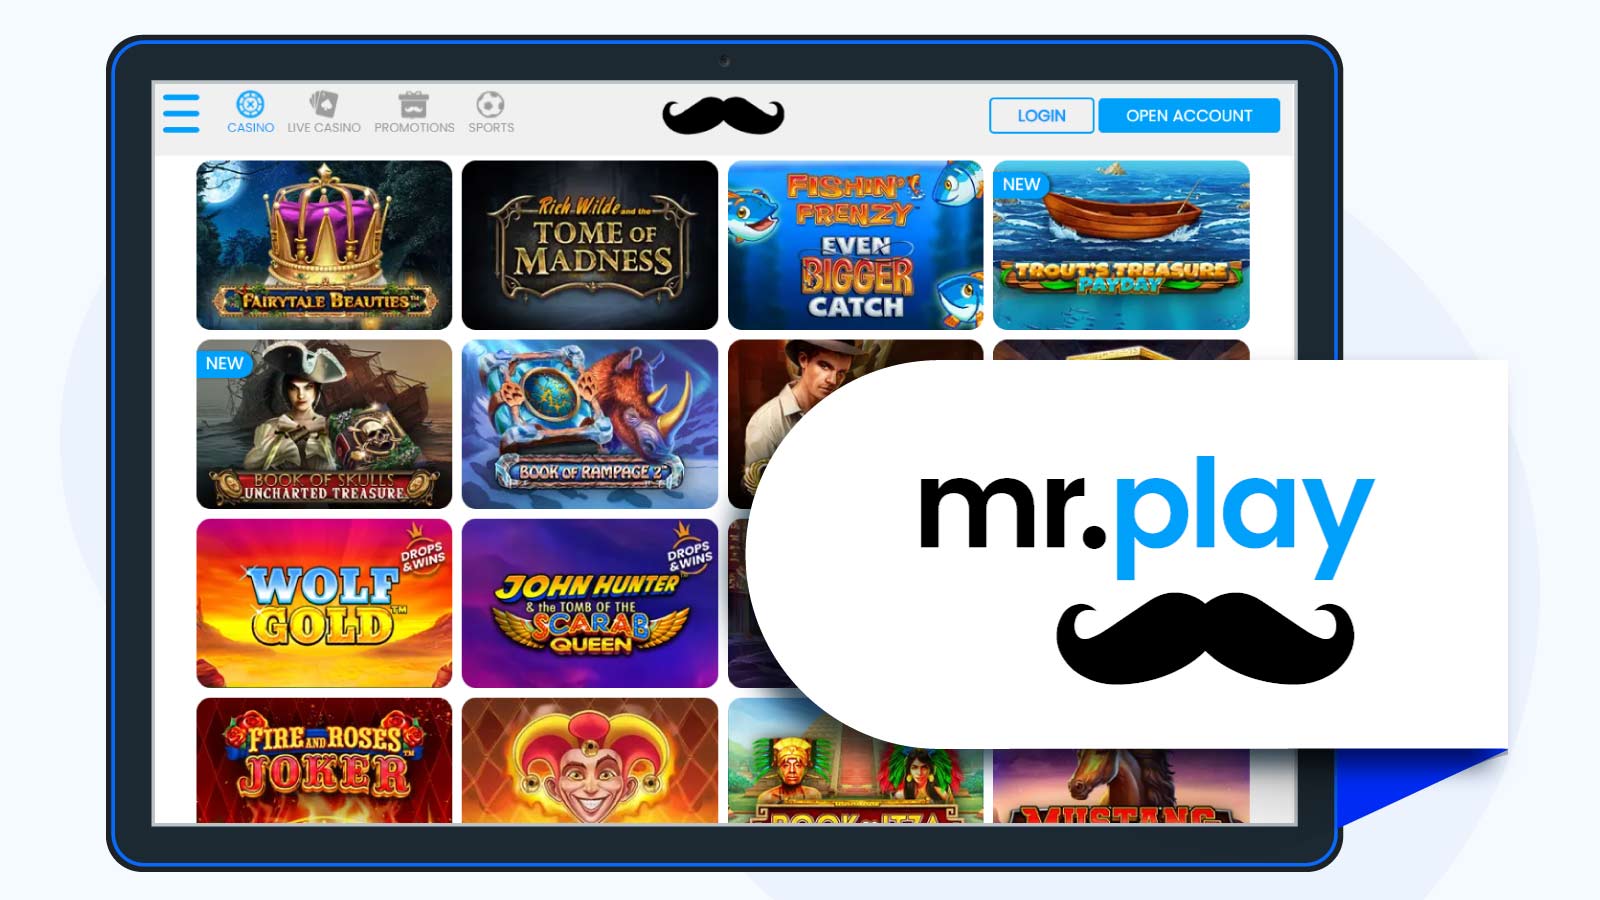 Mr. Play Casino Newest Features